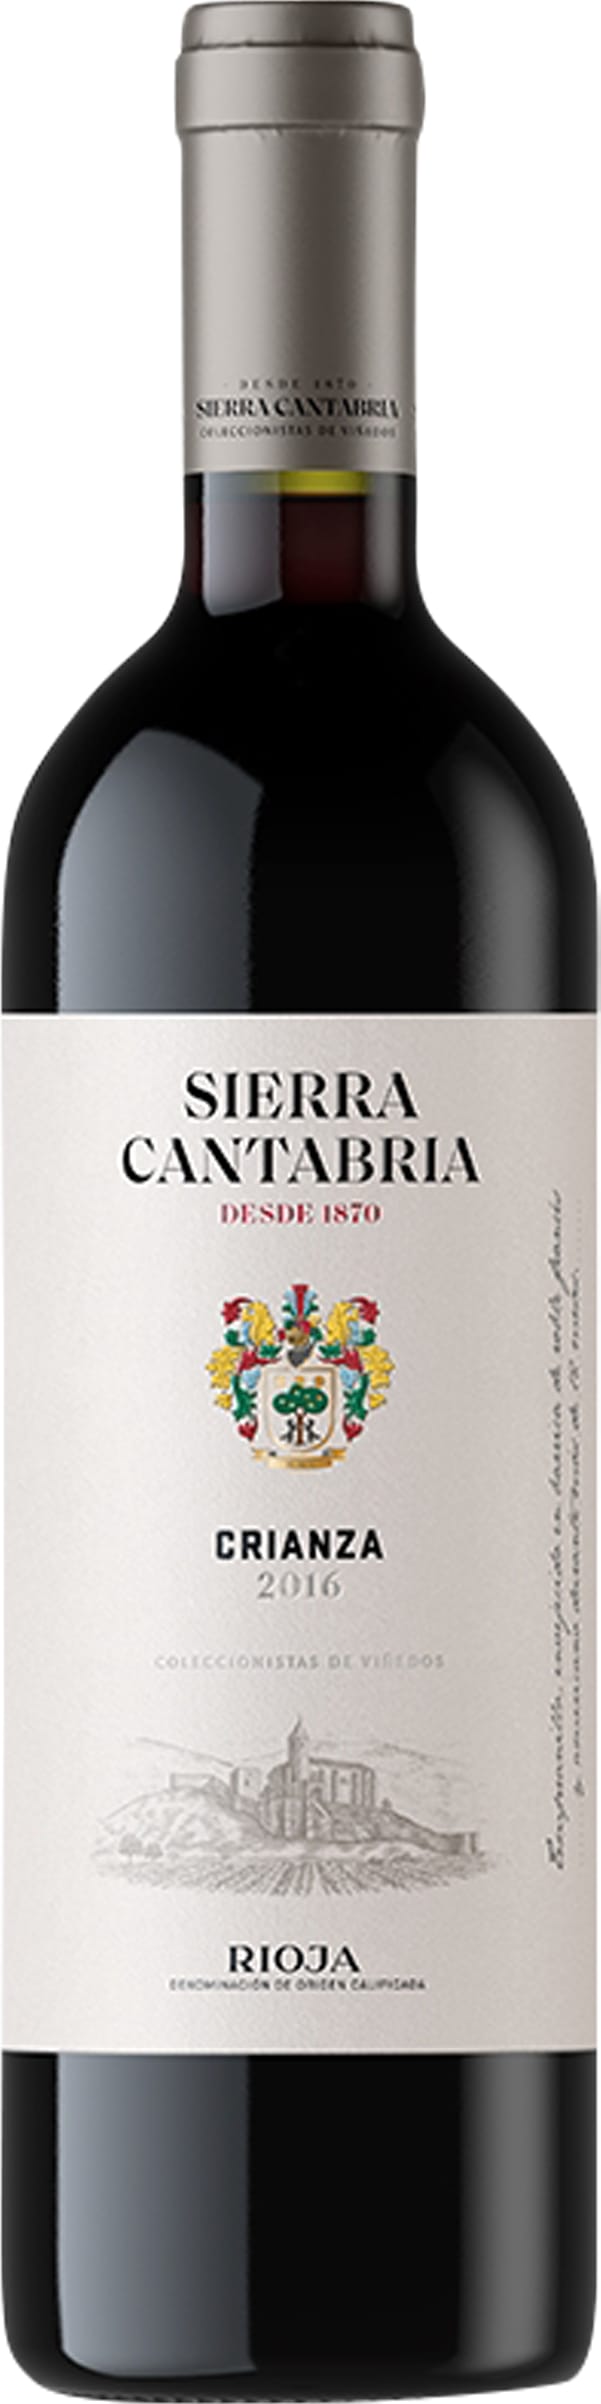 Sierra Cantabria Rioja Crianza 2019 75cl - Buy Sierra Cantabria Wines from GREAT WINES DIRECT wine shop